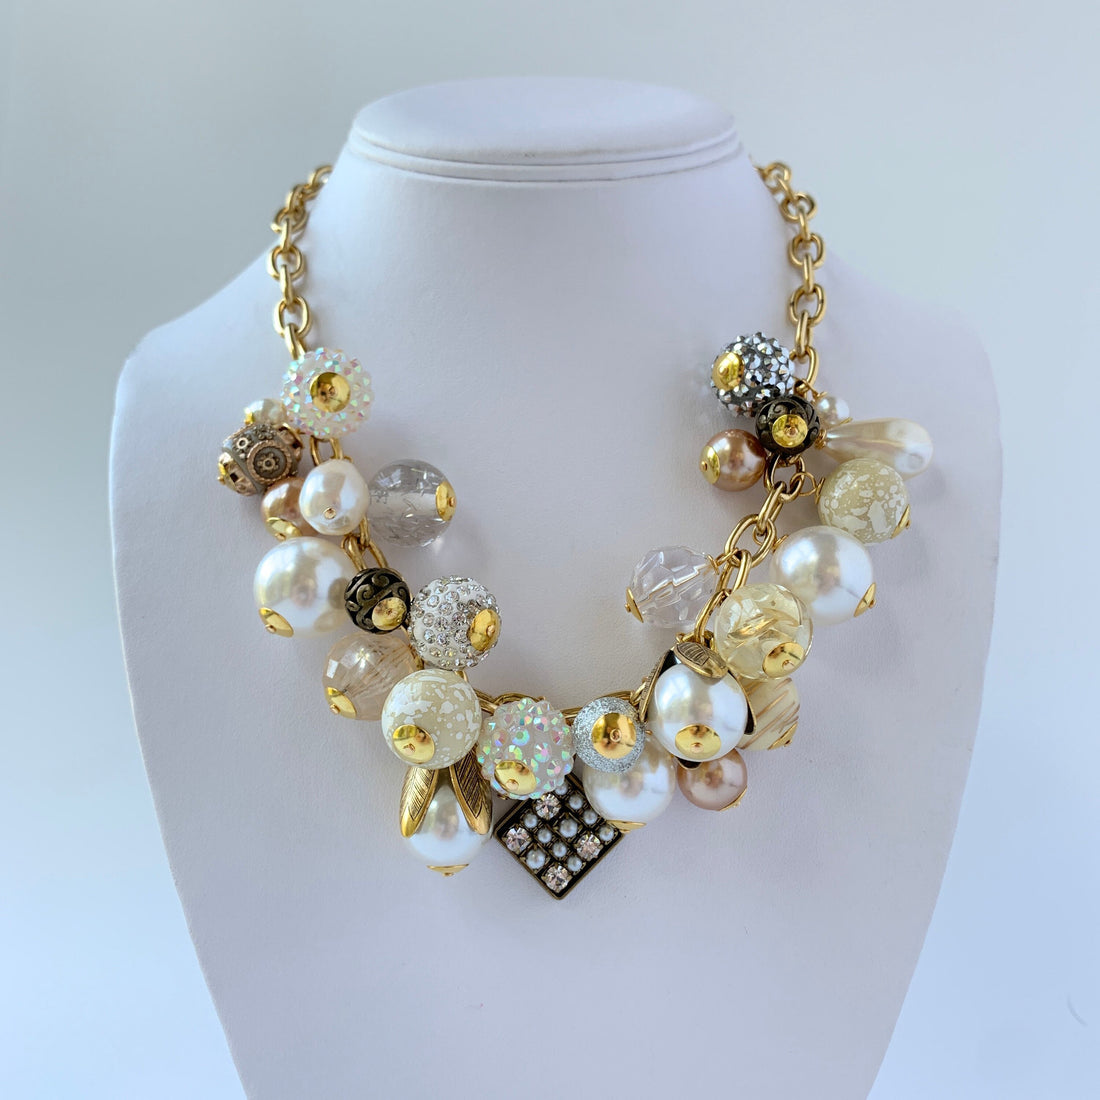 Lenora Dame Pearly Charm Necklace